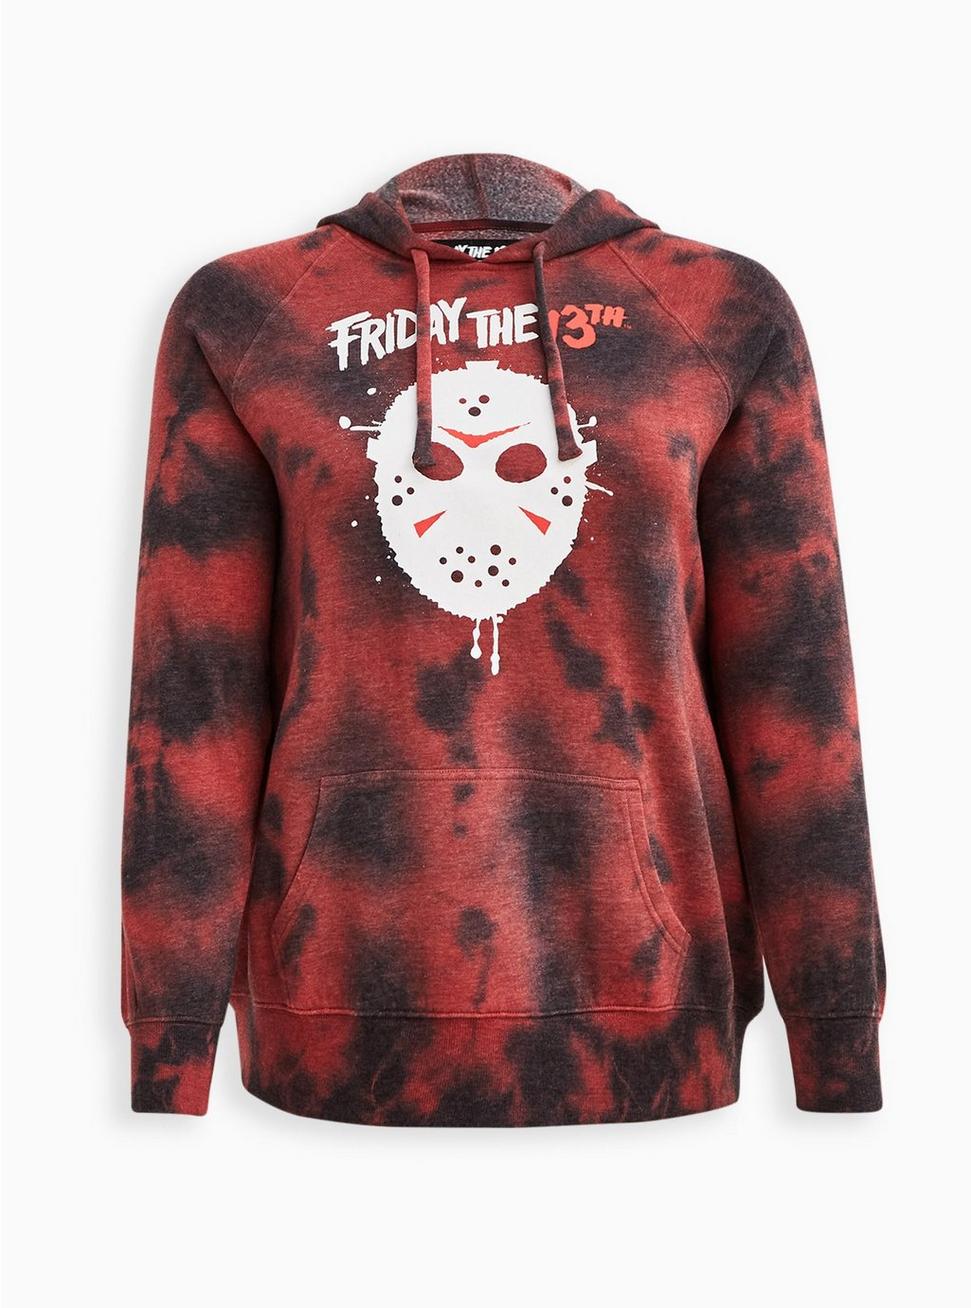 Plus Size Hoodie - Cozy Fleece Friday The 13th Red & Black Tie Dye, RED, hi-res